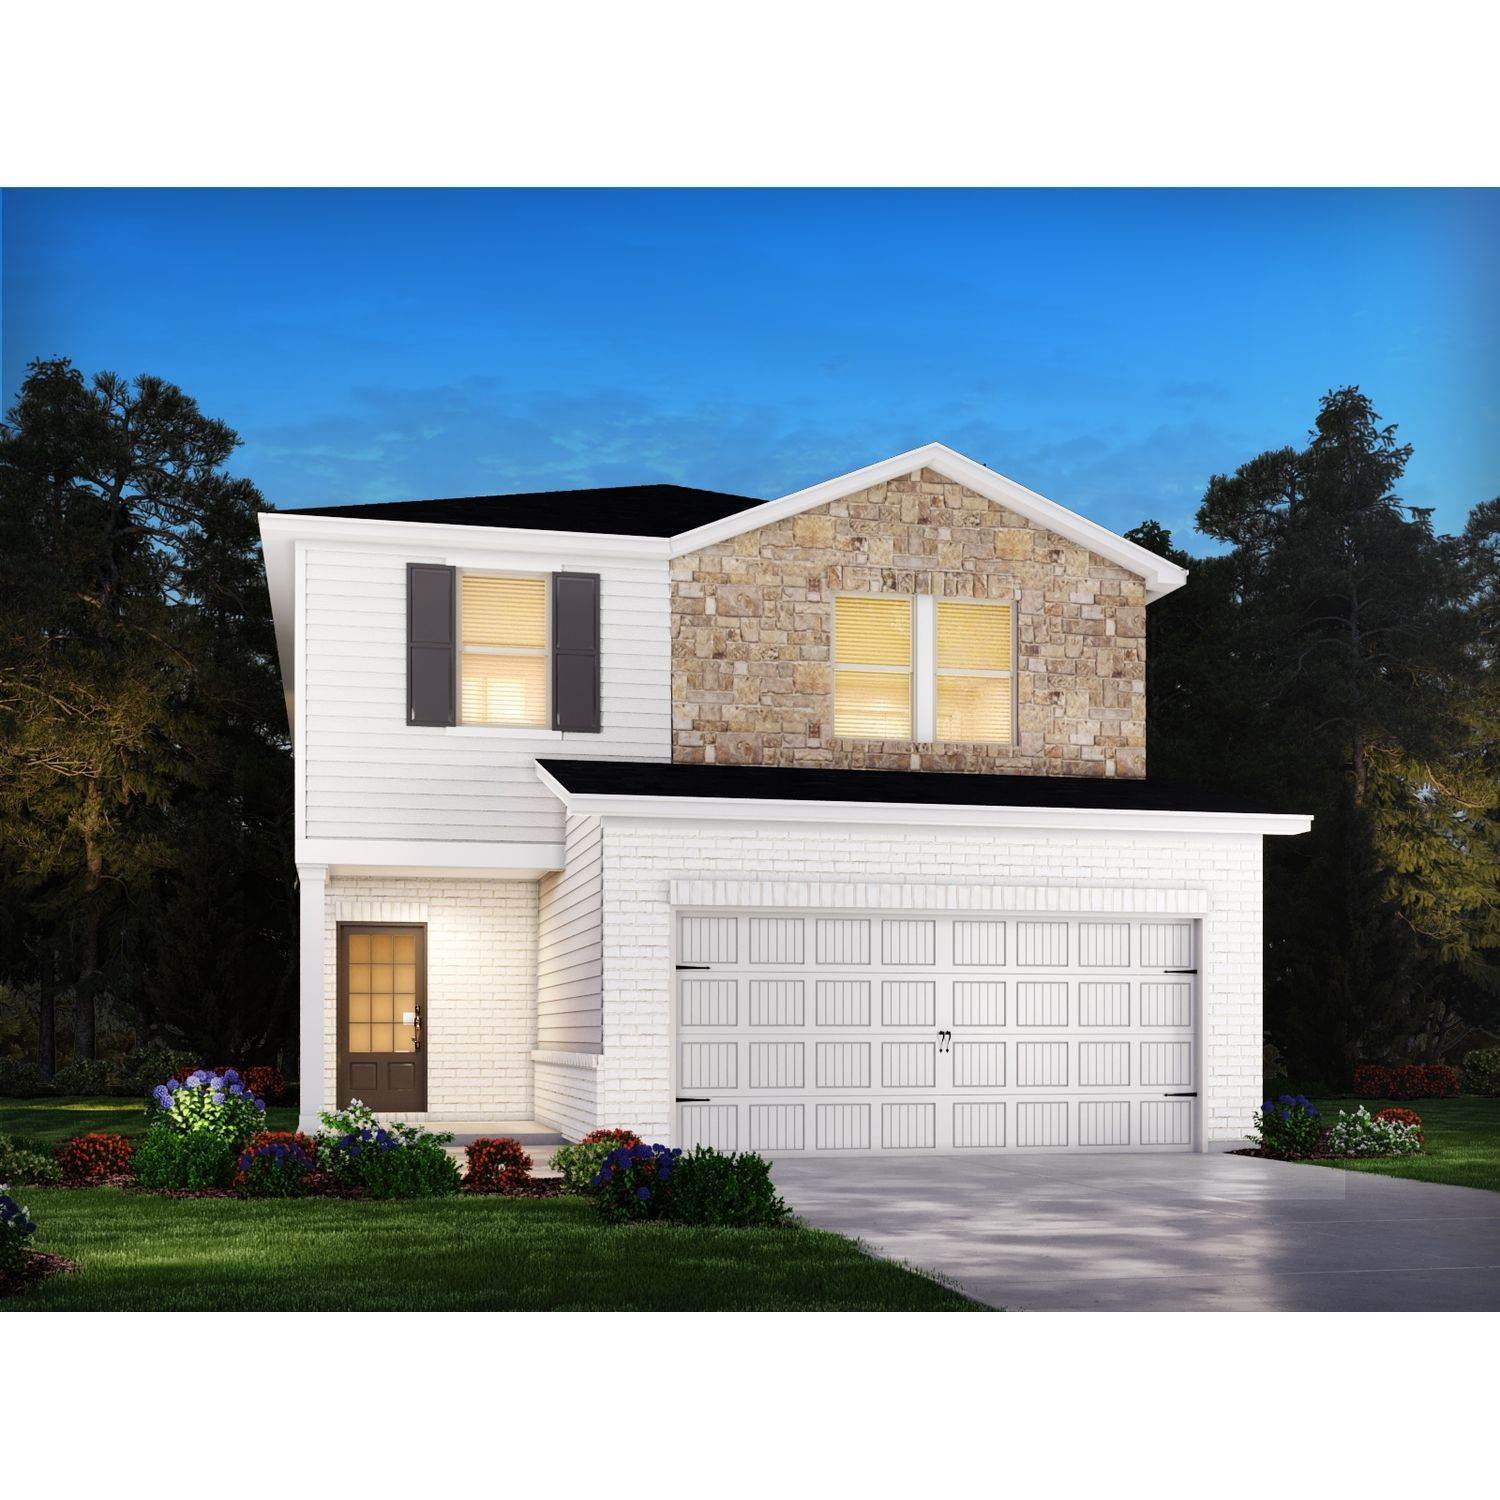 Single Family for Sale at Sweetwater Green - Royal Series Lawrenceville, GA 30044